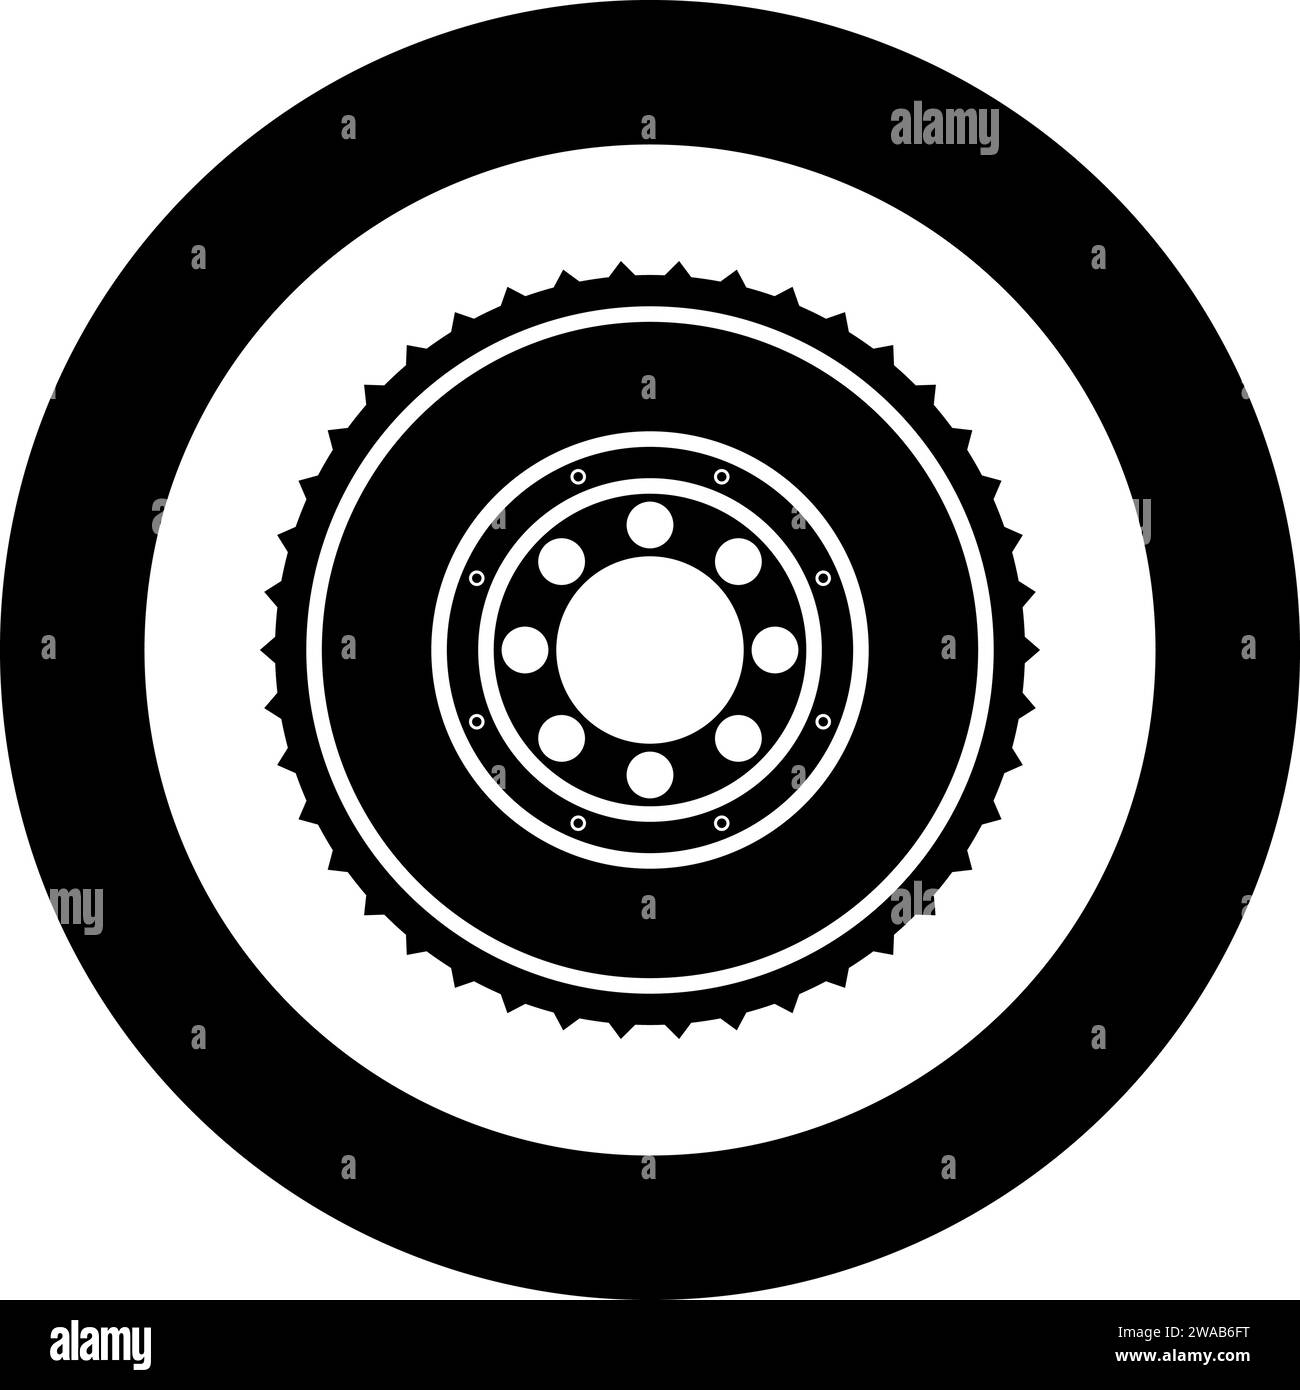 Car clutch flywheel cohesion transmission auto part plate kit repair service icon in circle round black color vector illustration image solid outline Stock Vector